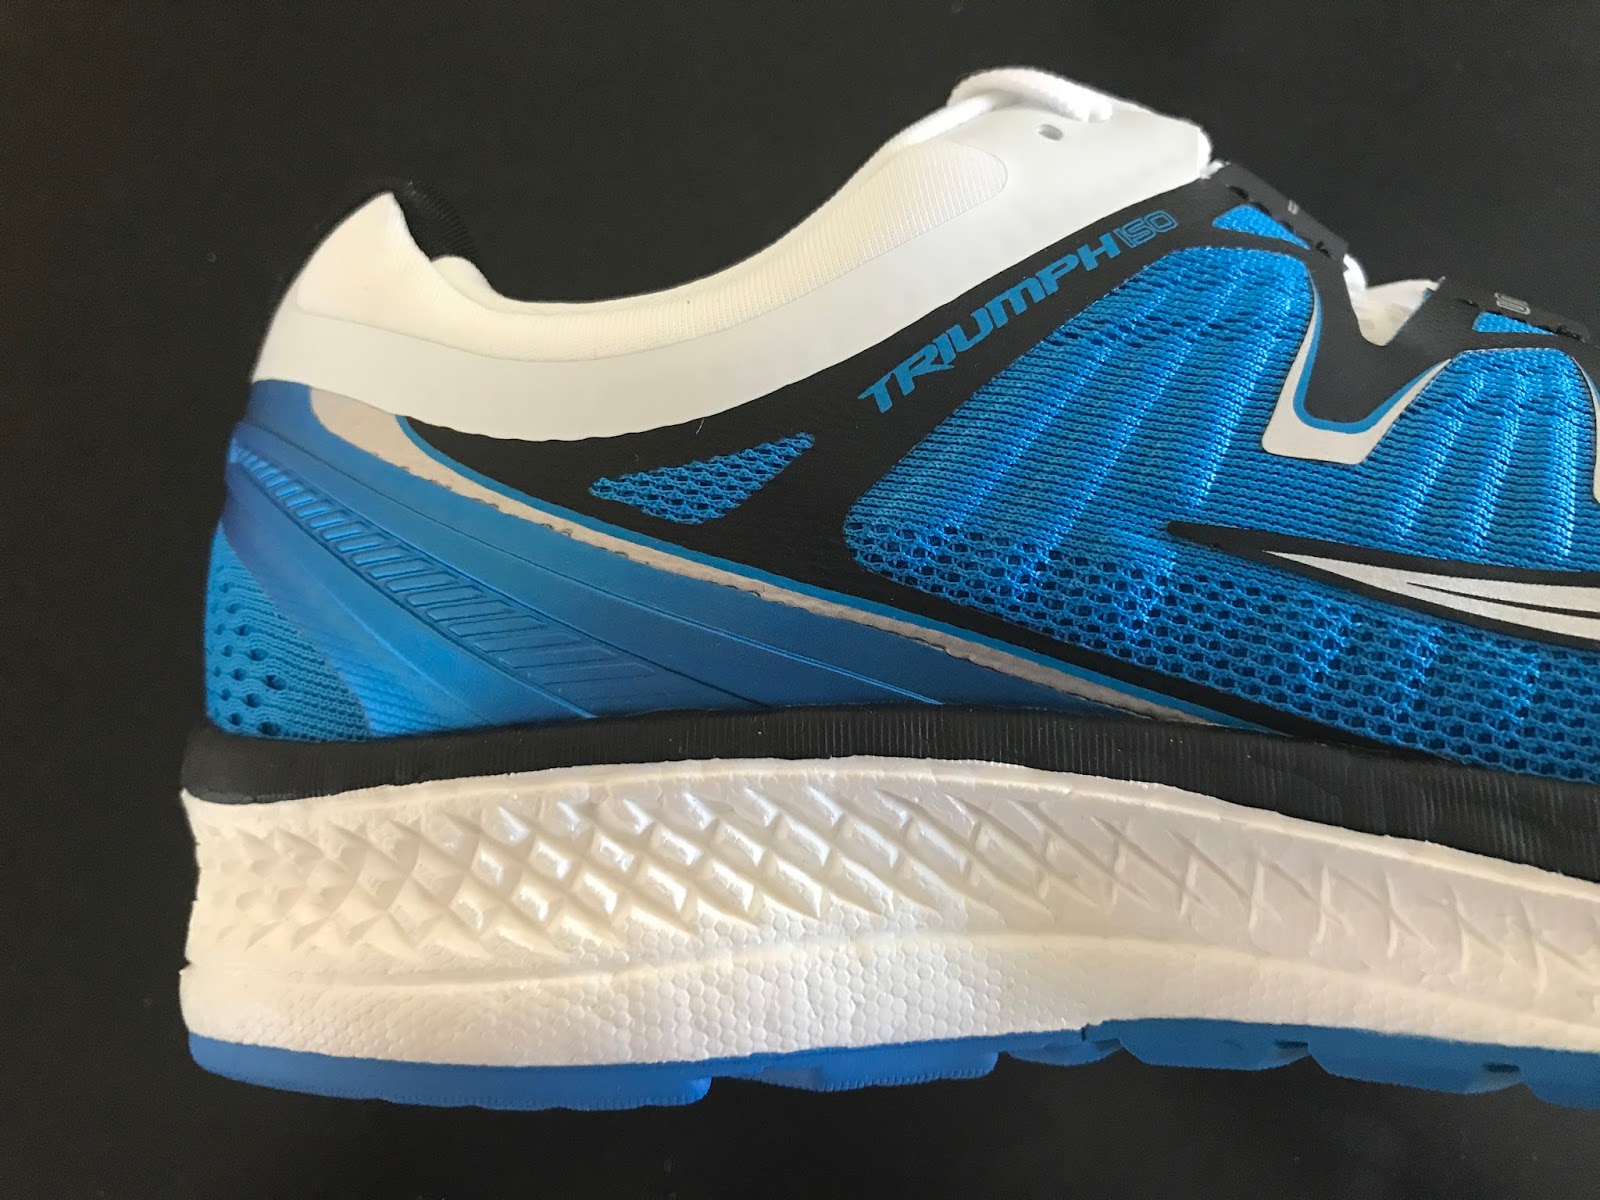 gebruiker Psychologisch parallel Road Trail Run: Saucony Triumph ISO 4 Review with Comparisons to Triumph ISO  3 and Others in its Class